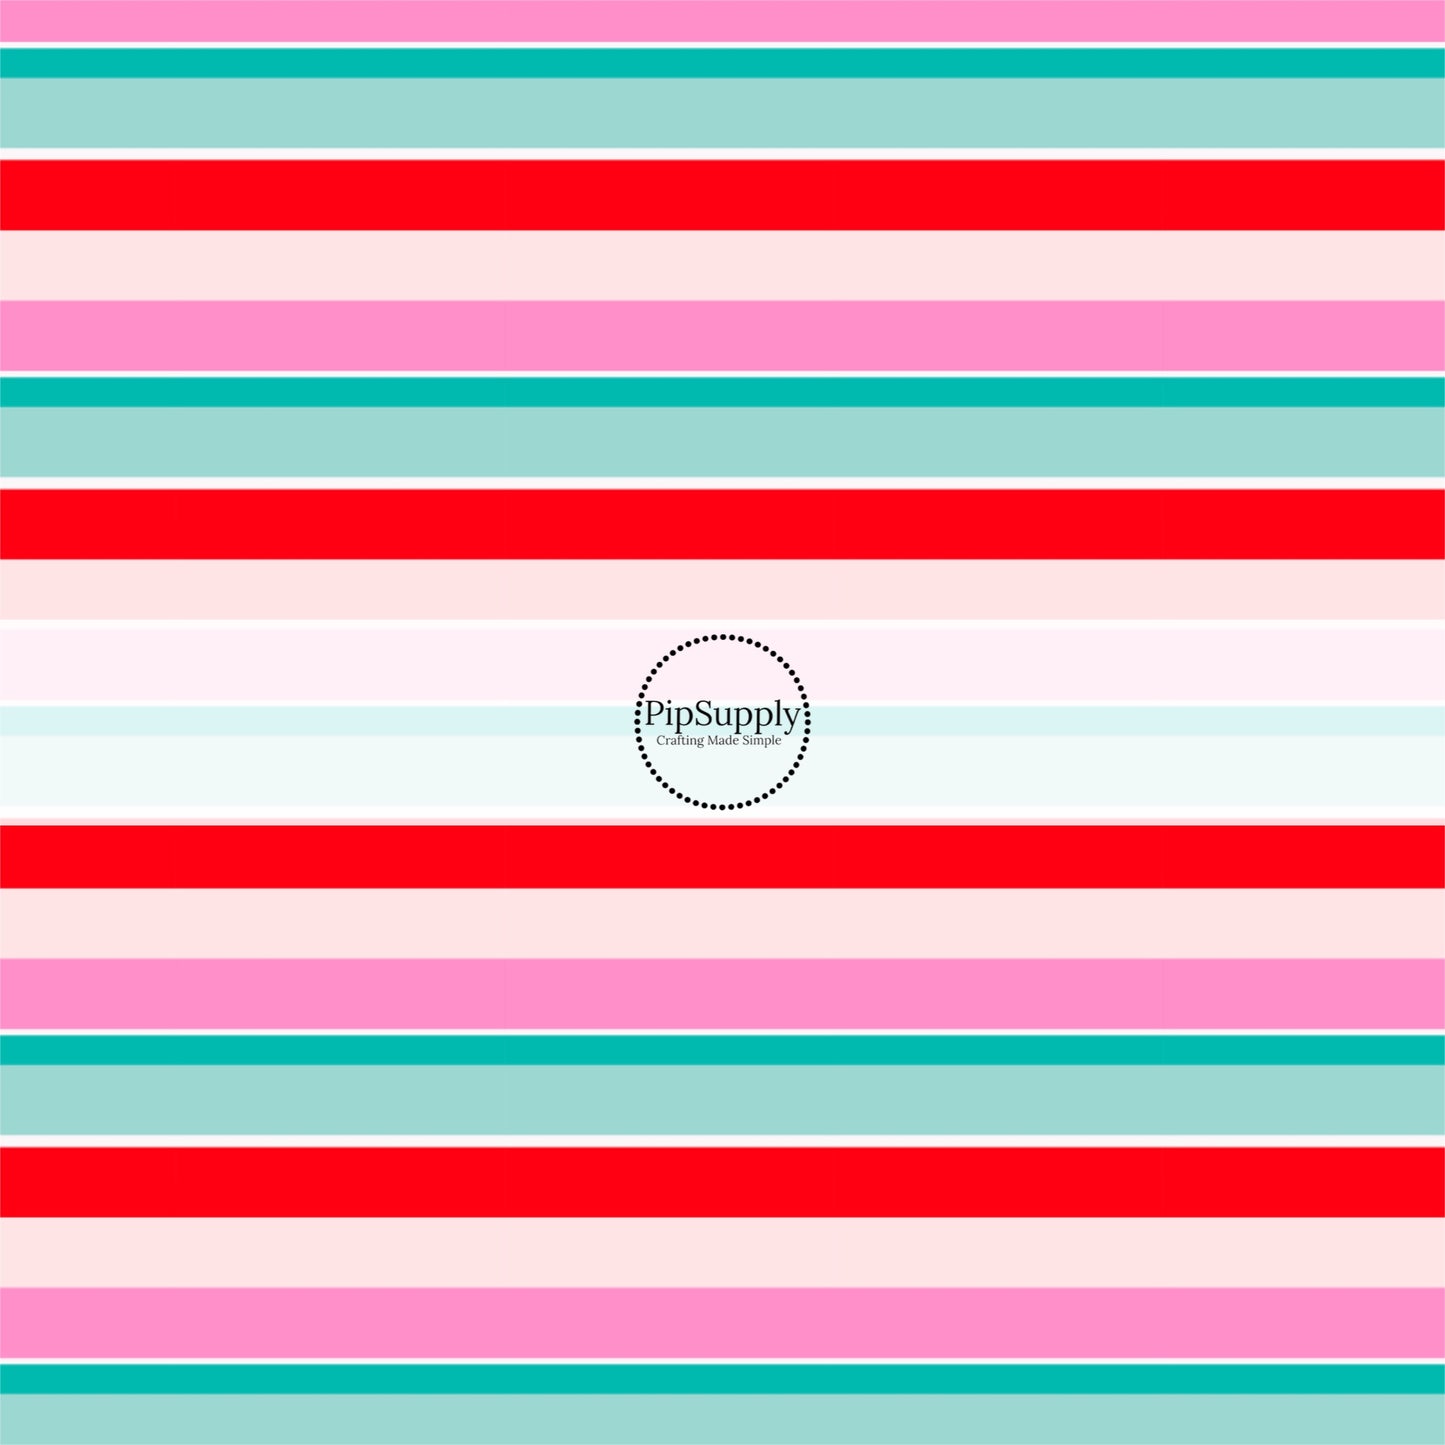 These holiday pattern themed fabric by the yard features light pink, white, teal, and red stripes. This fun Christmas fabric can be used for all your sewing and crafting needs!